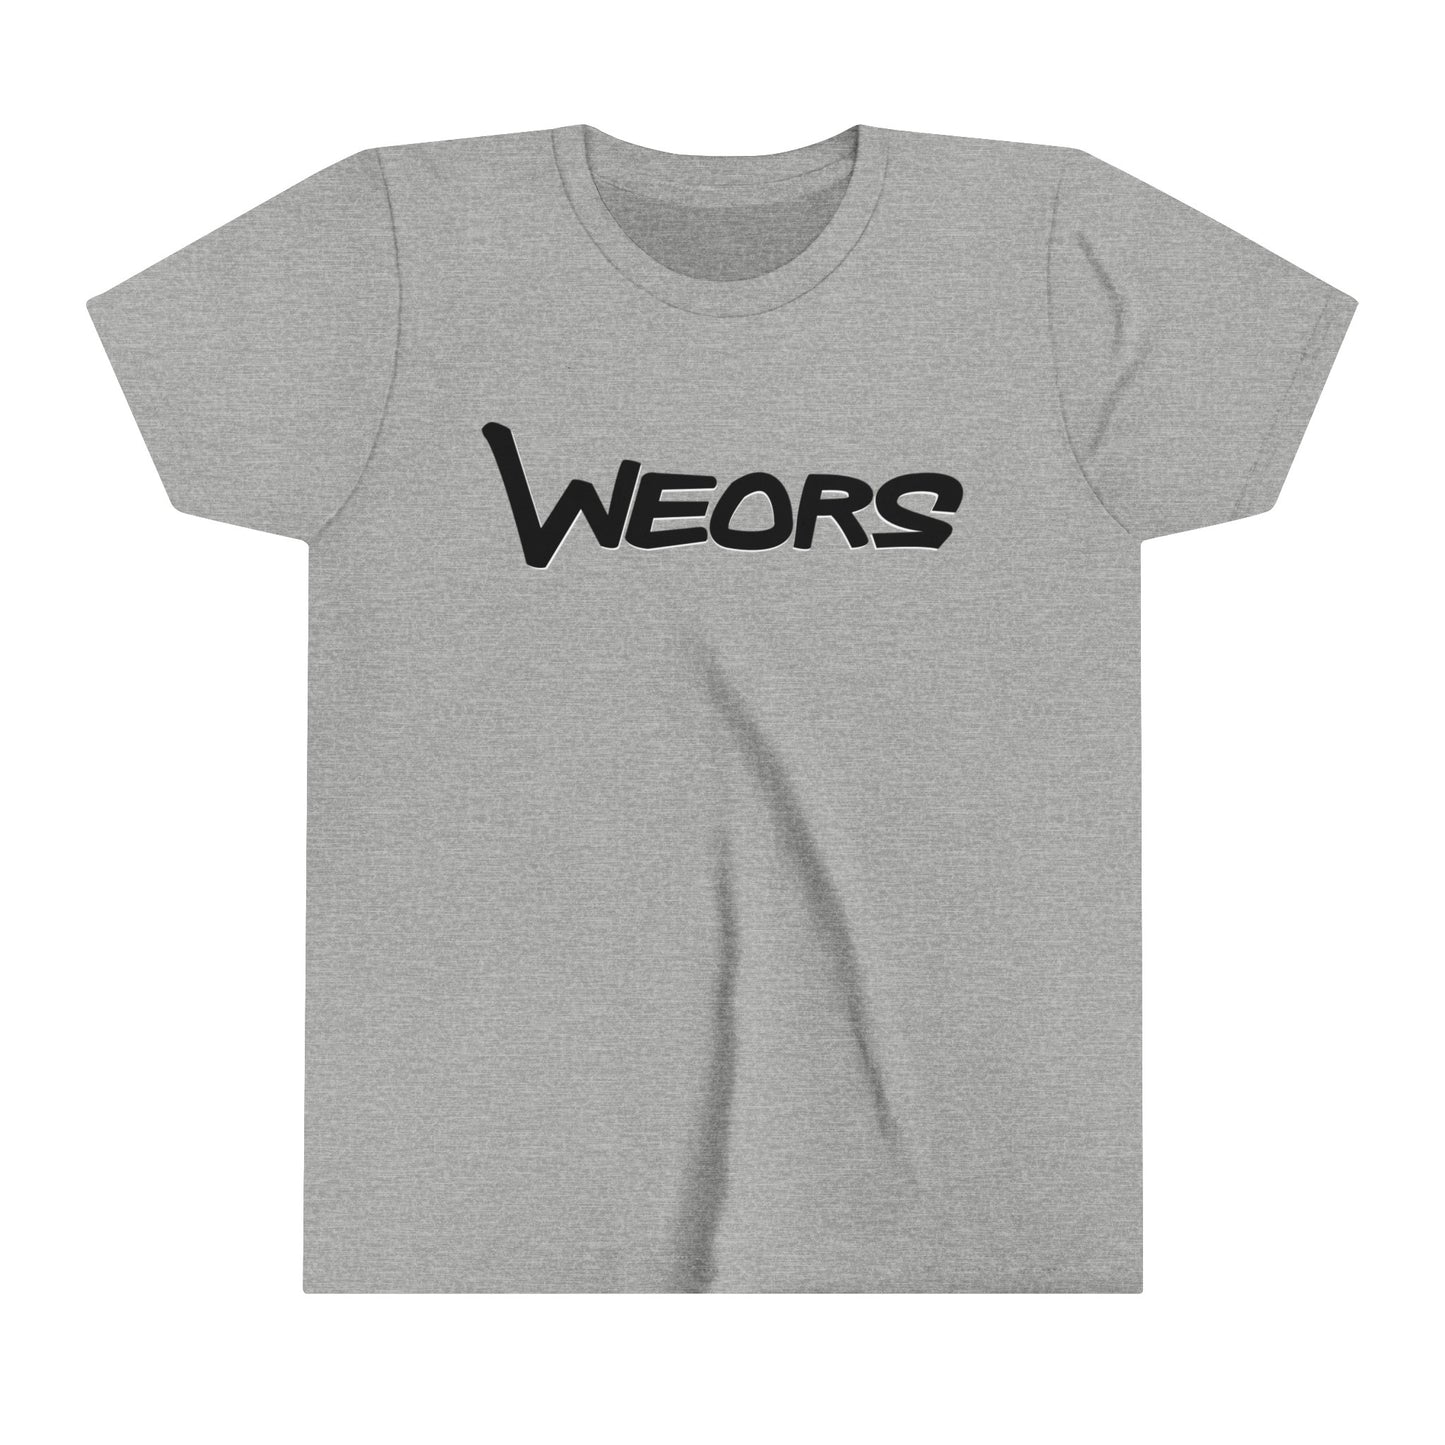 Youth T-shirt - Weors